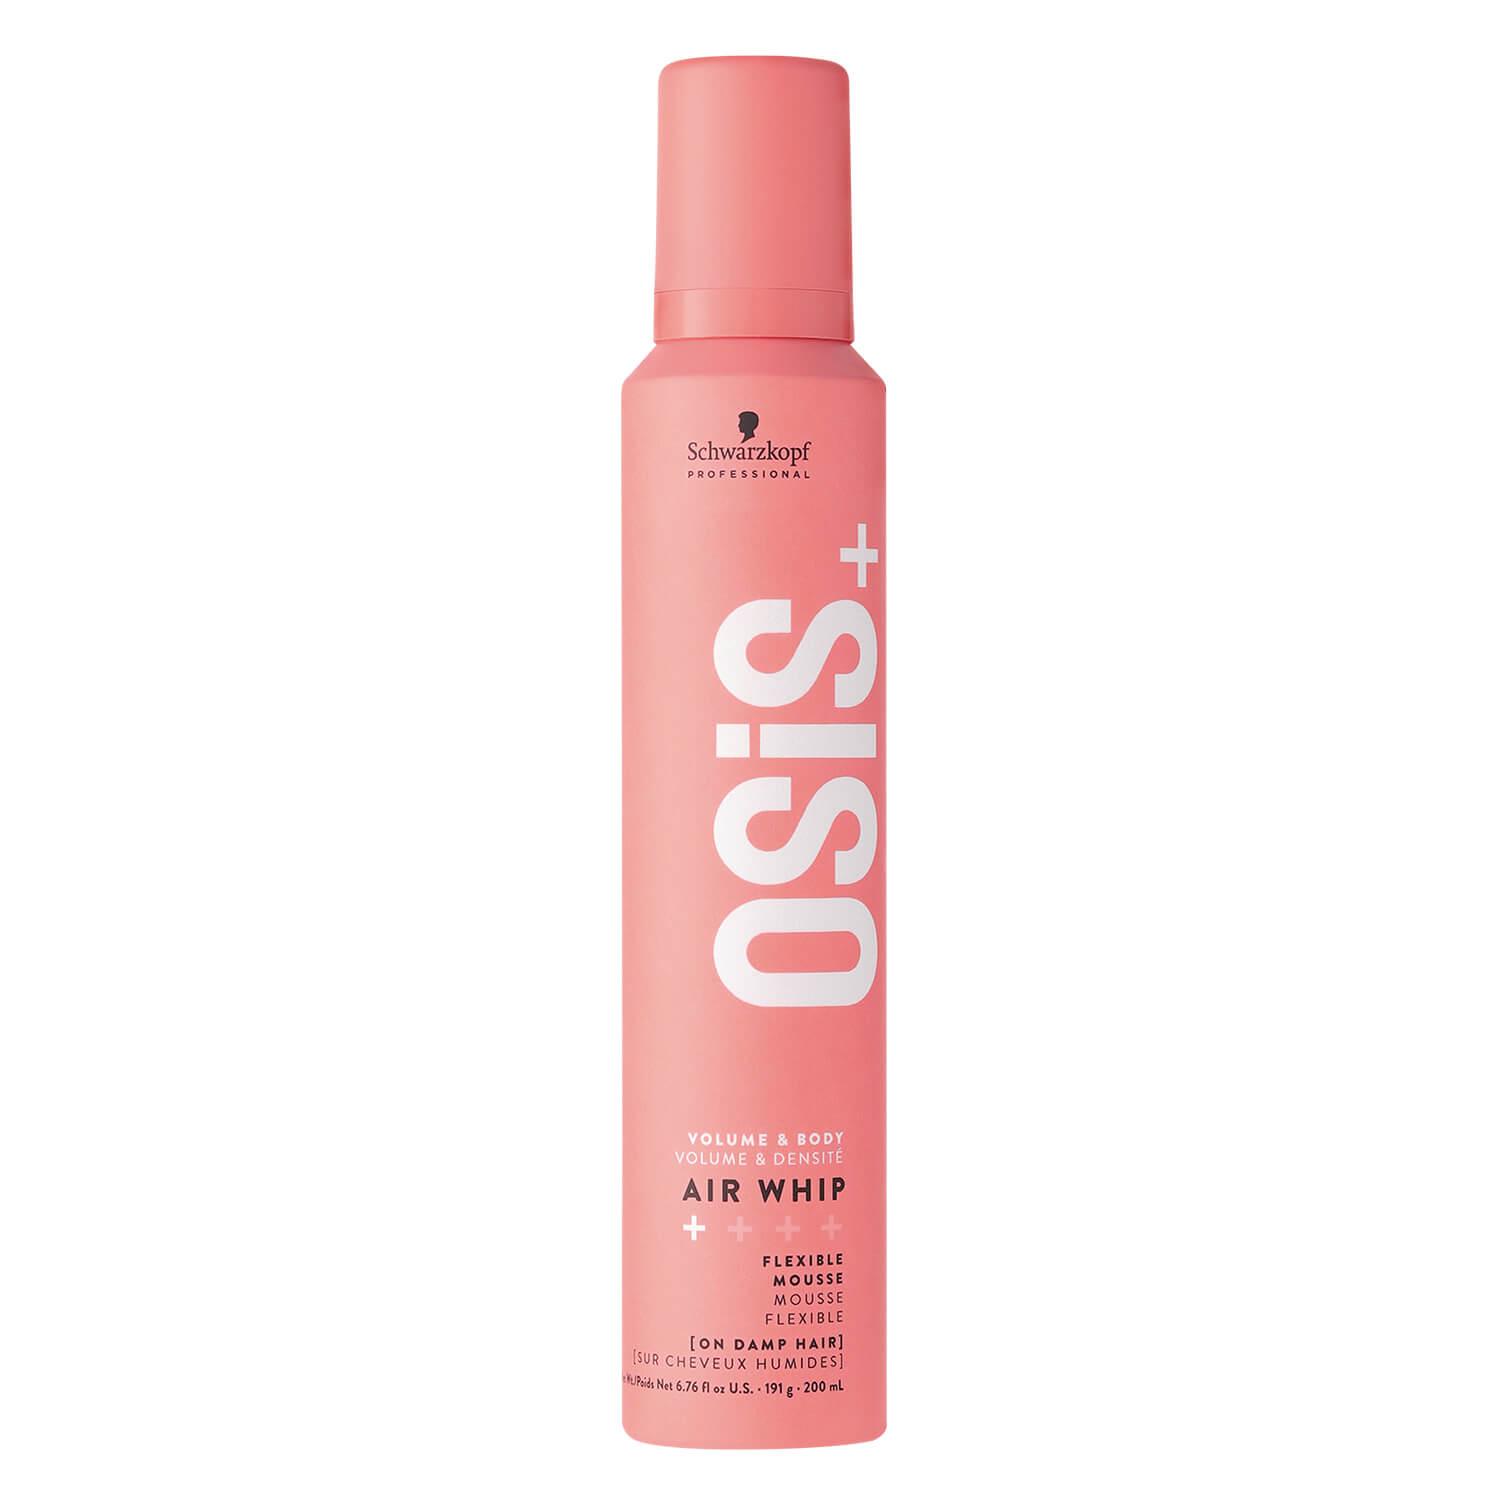 Osis - Air Whip Flexible Mousse